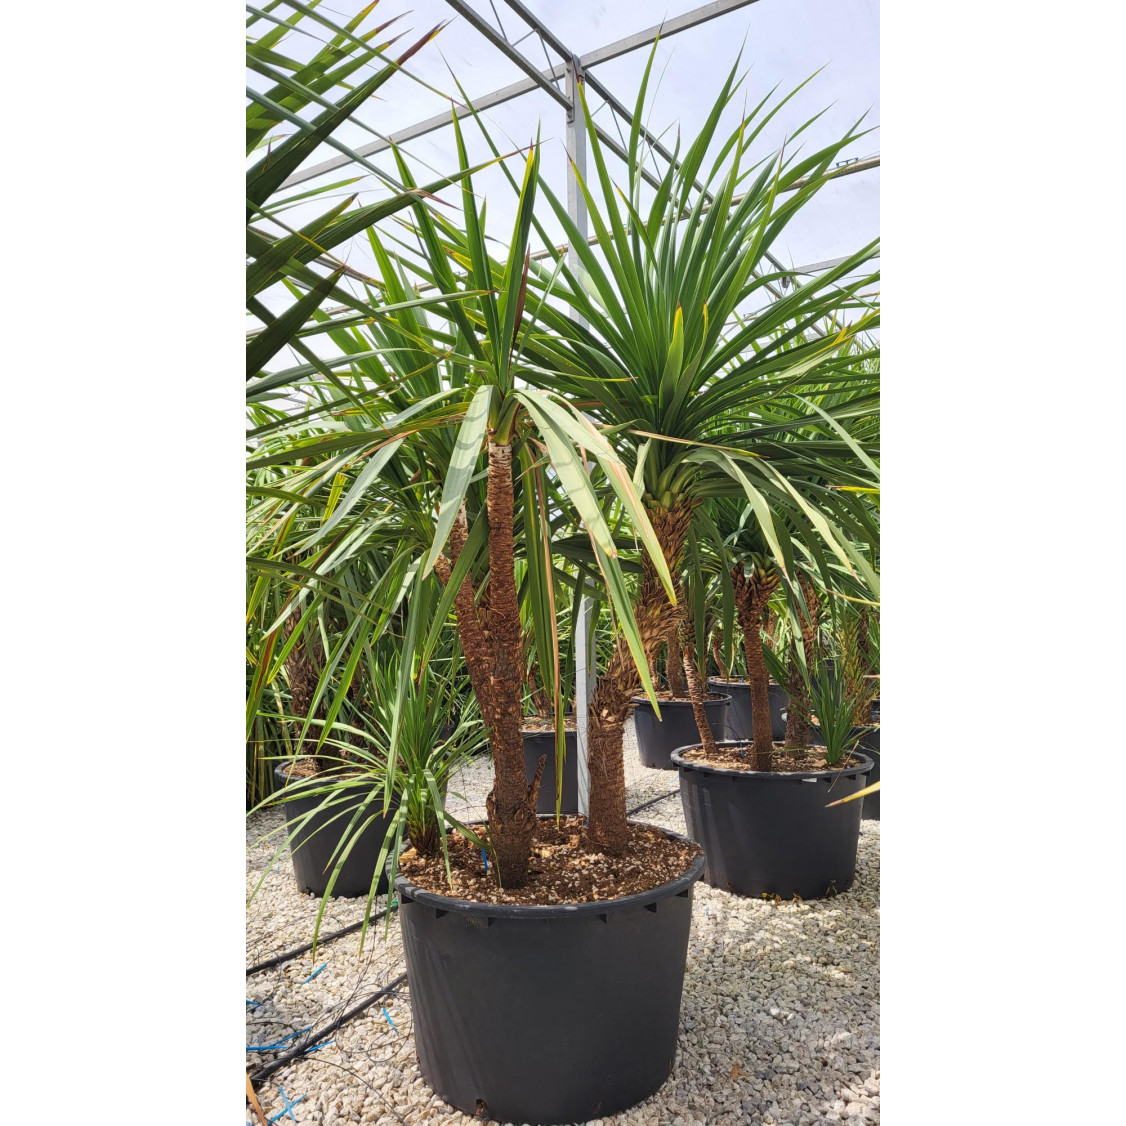 Cordyline Australis Cabbage Palm (Multi Stem) 200-250cm planted total height - NEW, HEAVIER GRADE IN 285 LITRE POT